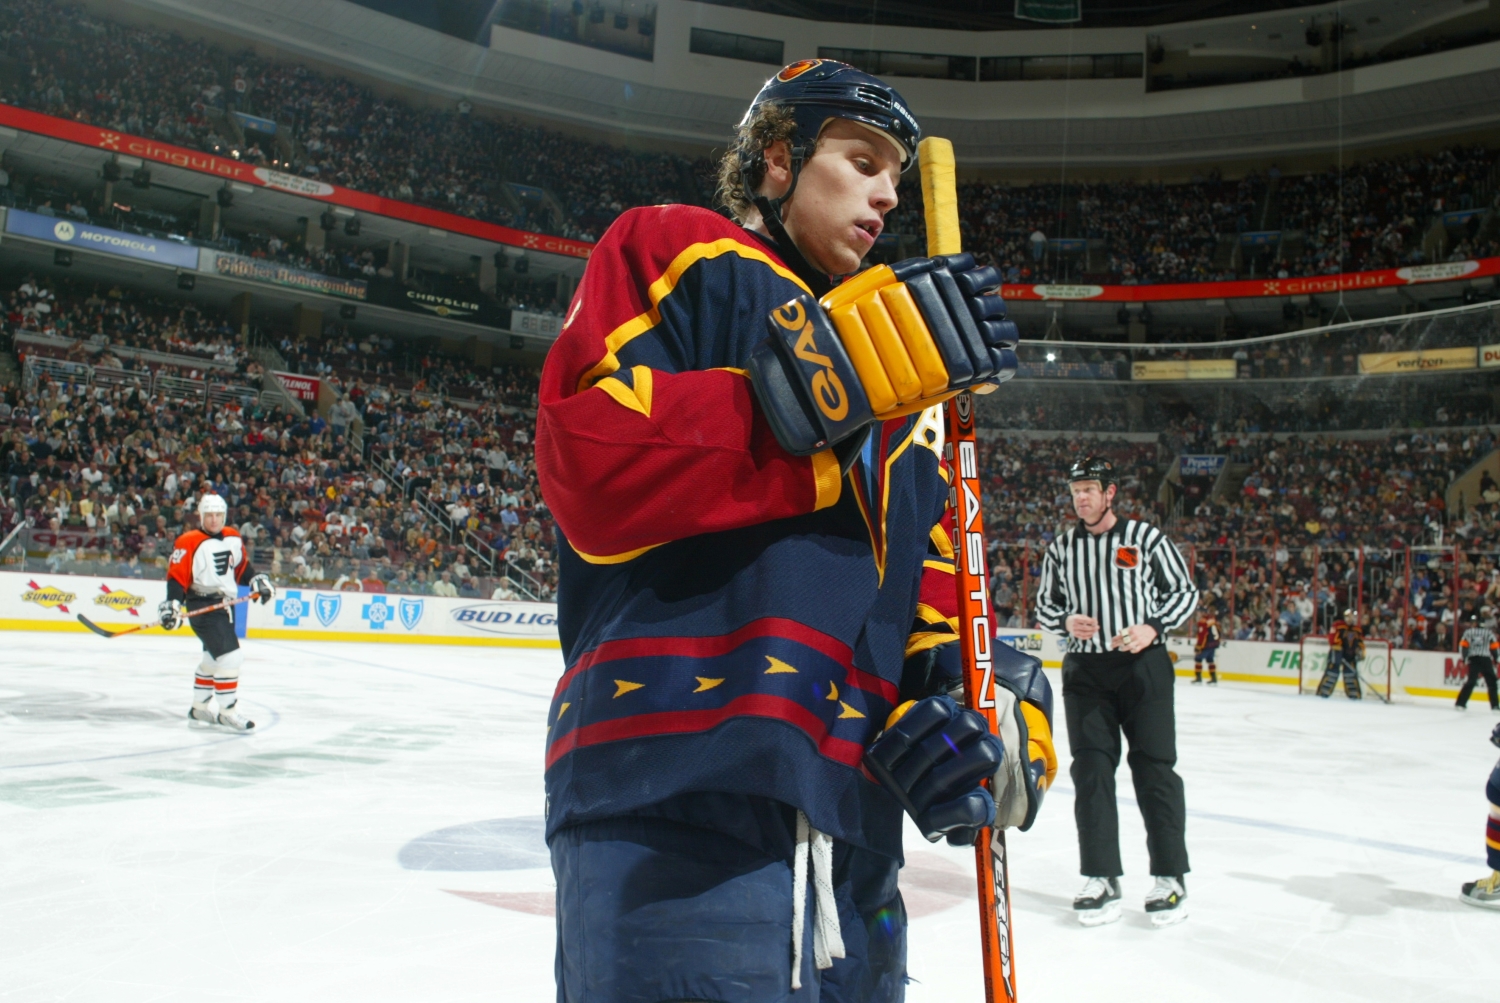 Dany Heatley stands on the ice during an Atlanta Thrashers game from the 2003 season.